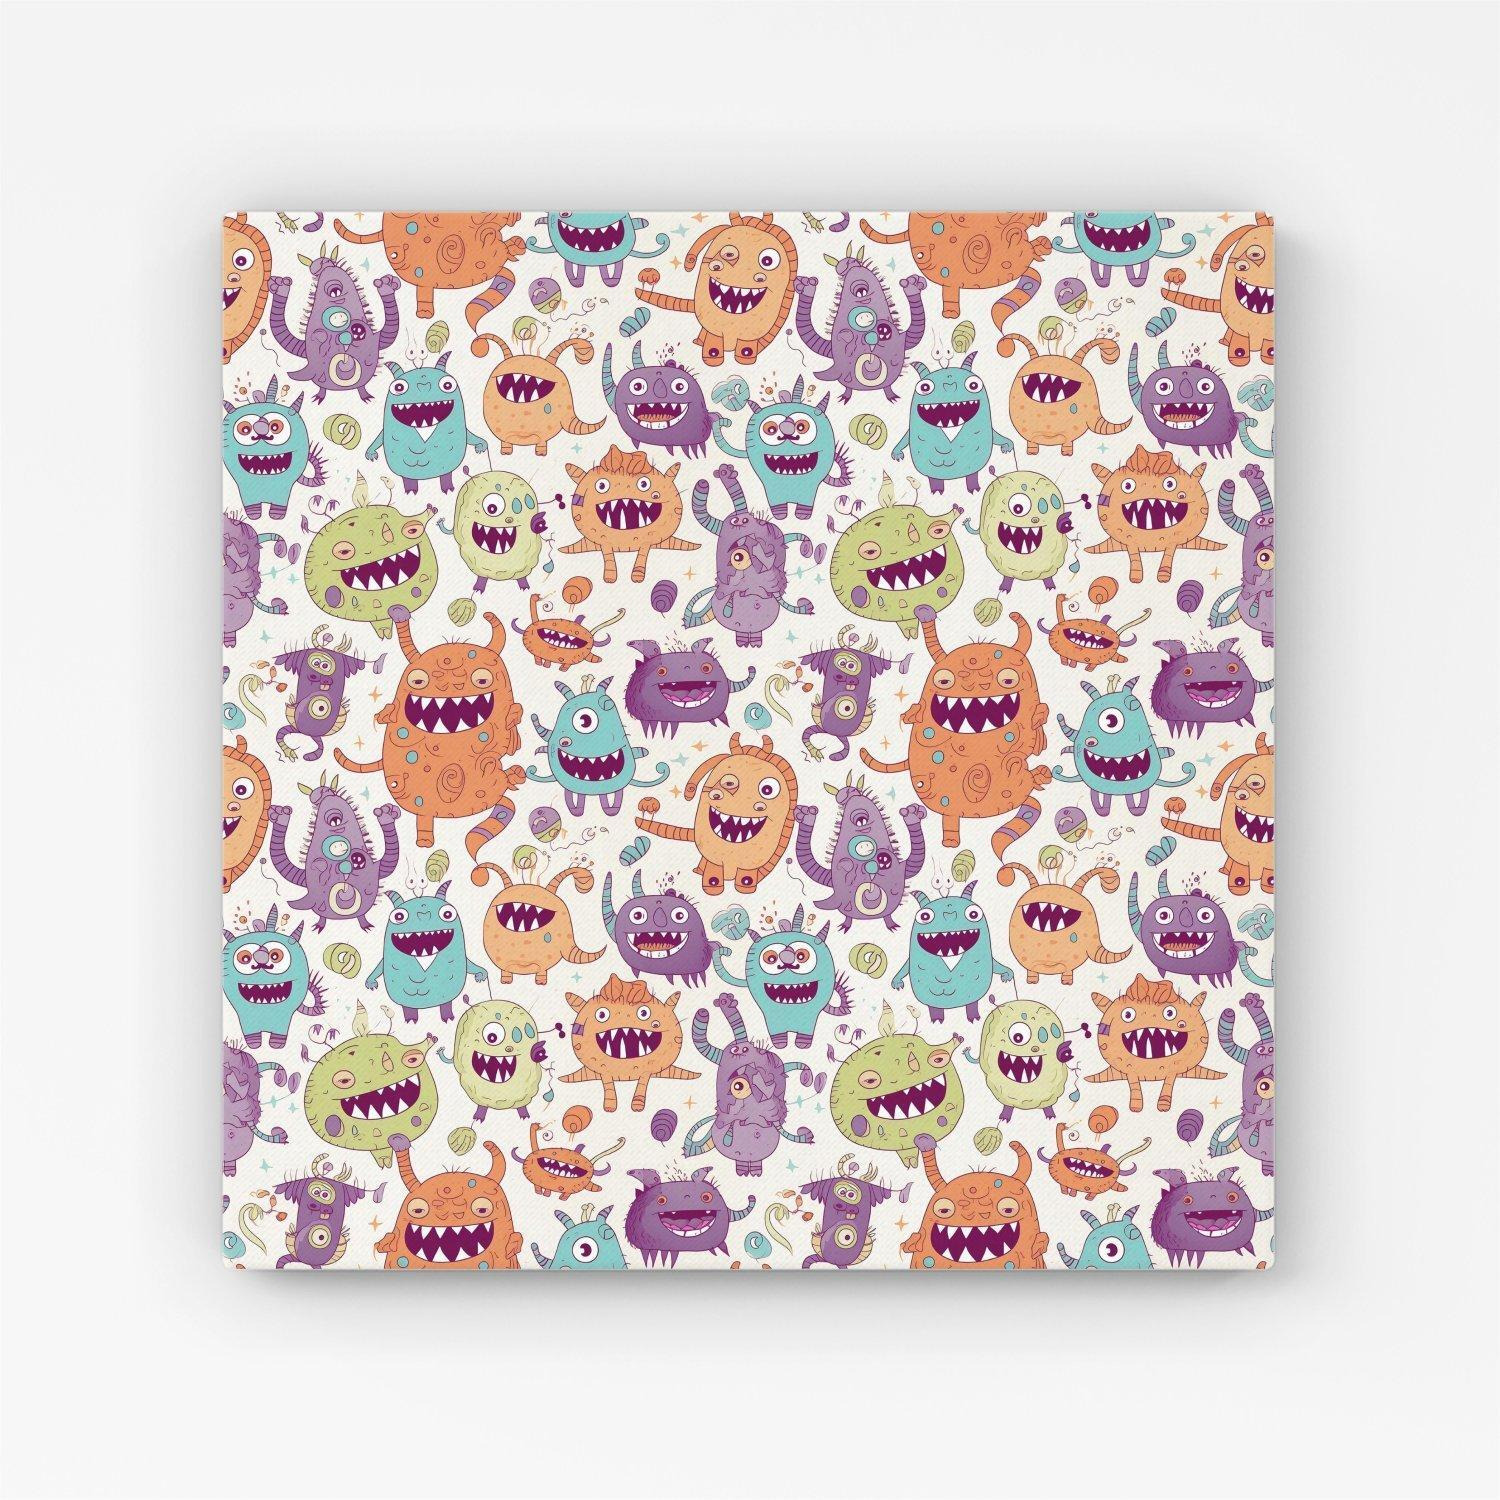 Playful Halloween Monsters Canvas - image 1